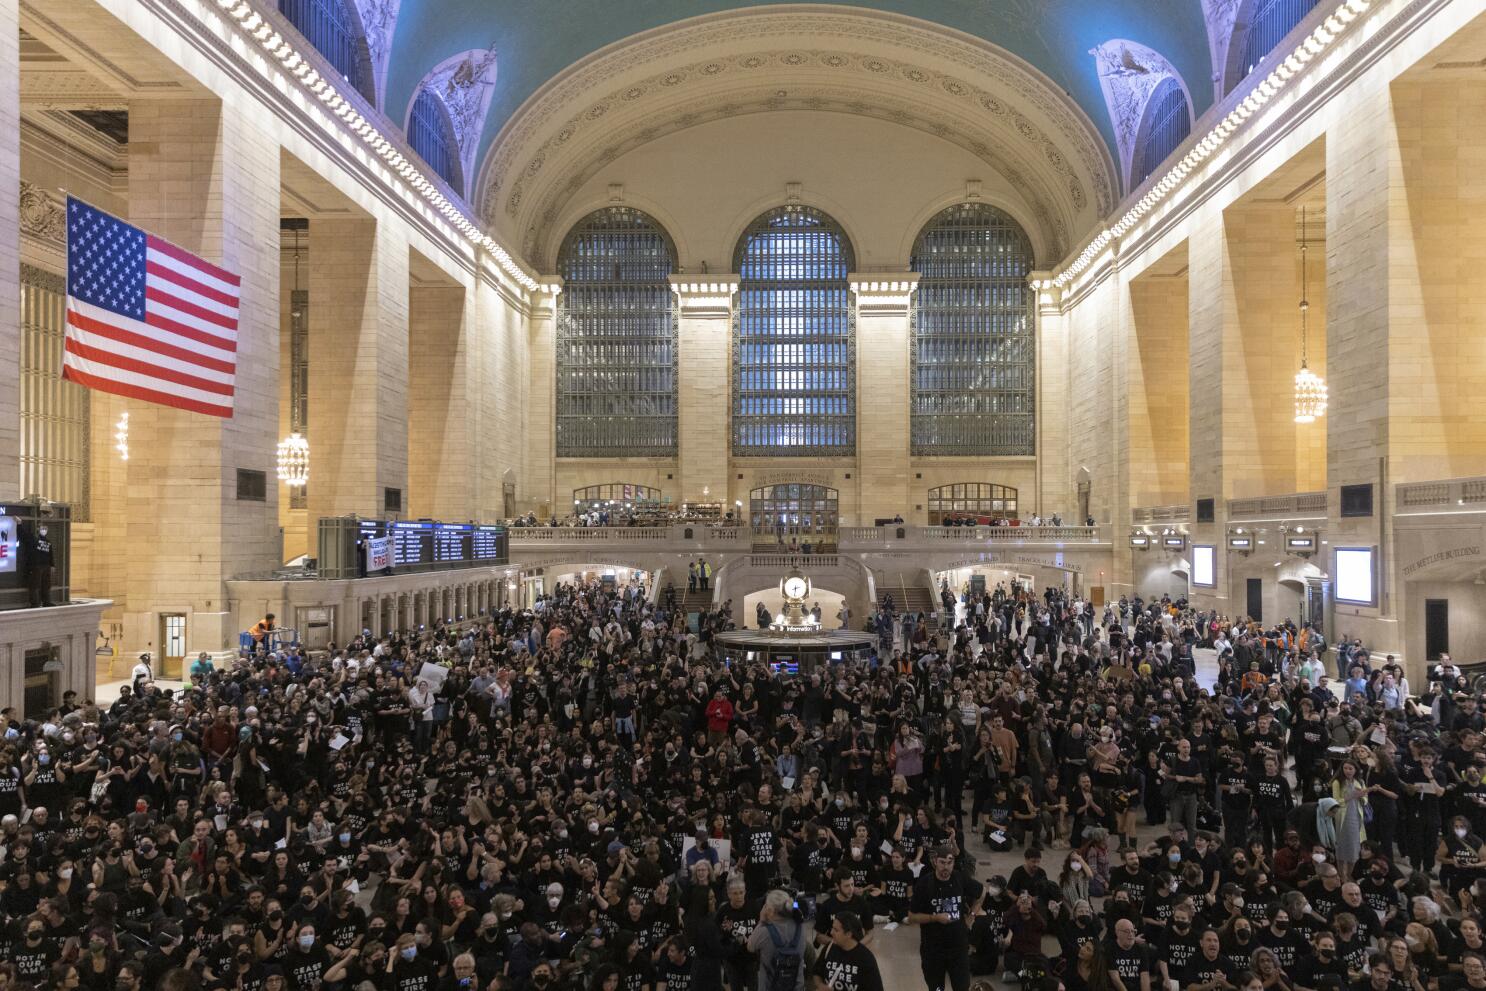 Never Again for Anyone': Jewish Protesters Demanding Gaza Cease-Fire  Arrested in Grand Central Station